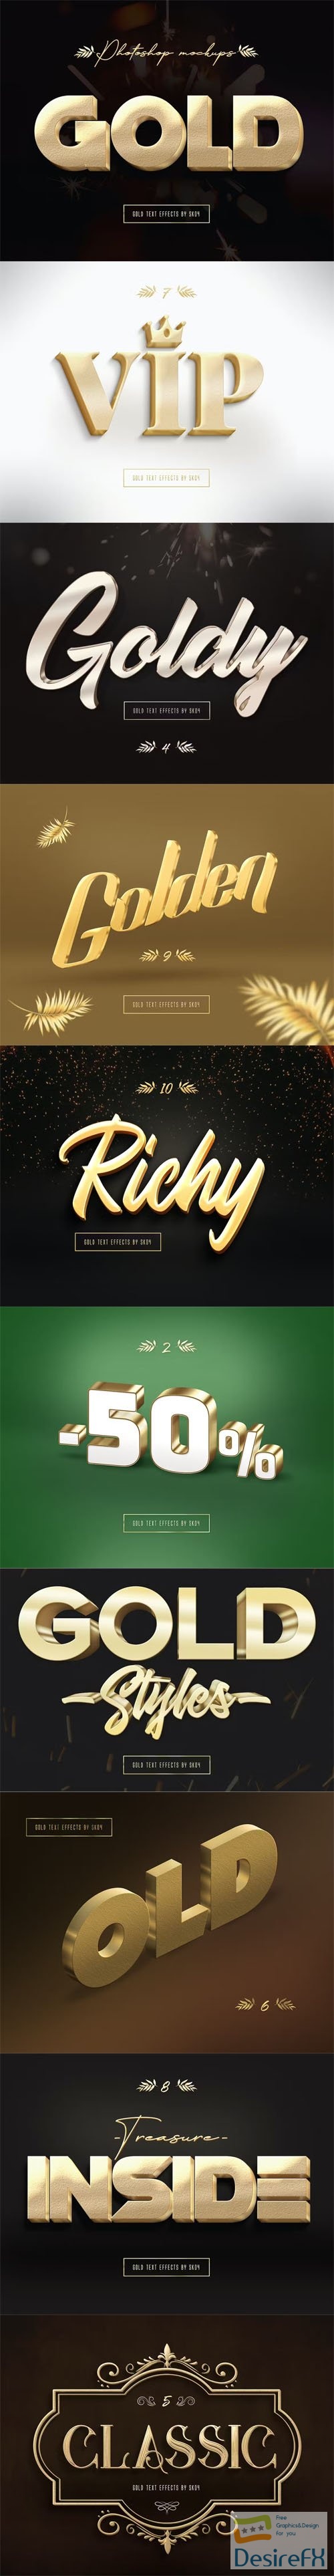 3D Gold Text Effects - Photoshop Styles